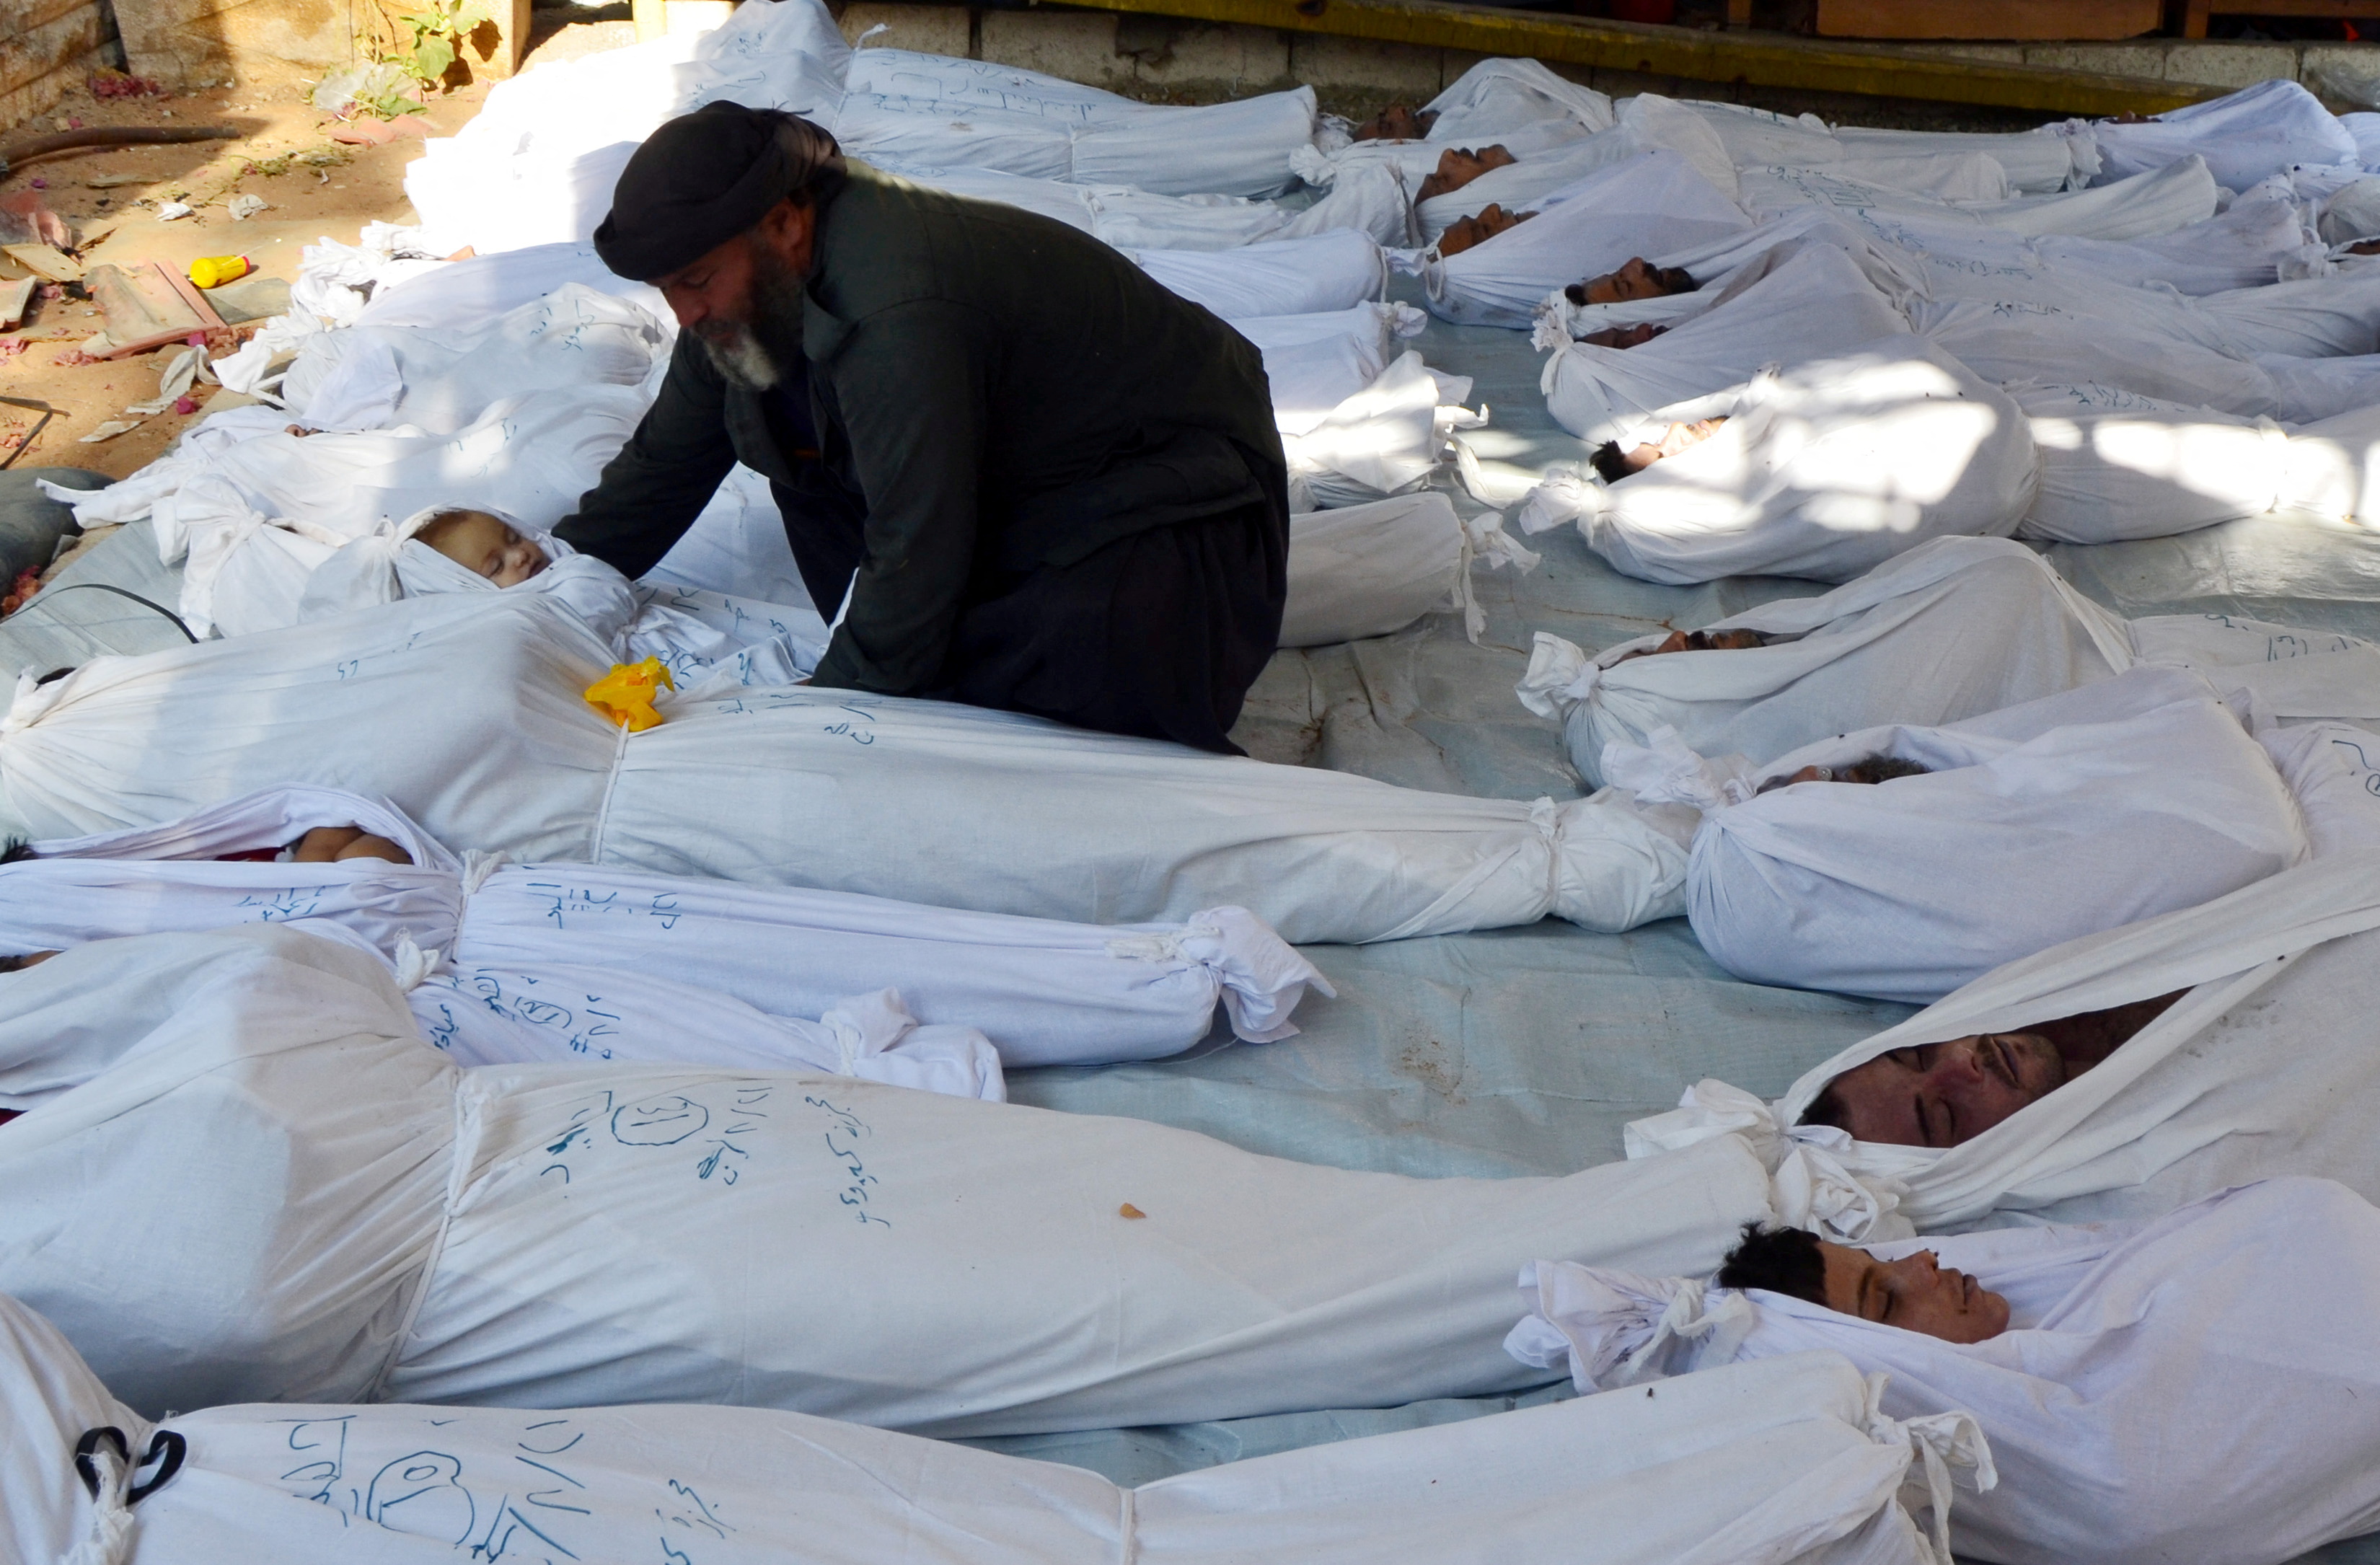 A man holds the body of a dead child among bodies of people in the Douma neighbourhood of Damascus